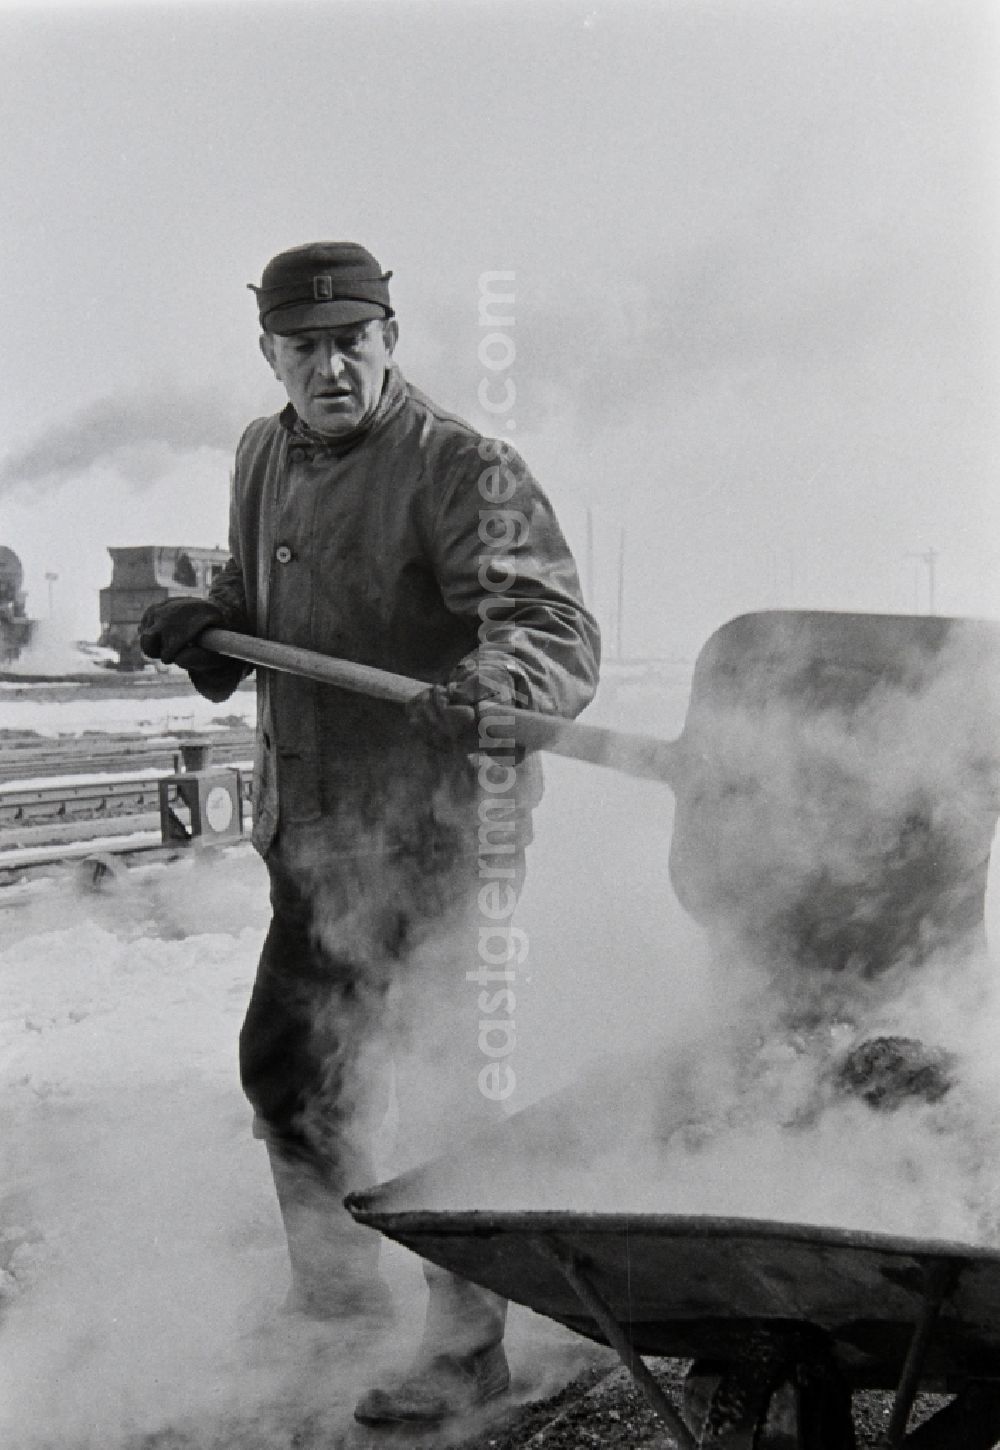 Halberstadt: Cleaning and purification work and ash disposal in the railway depot of the German Reichsbahn in Halberstadt in the territory of the former GDR, German Democratic Republic